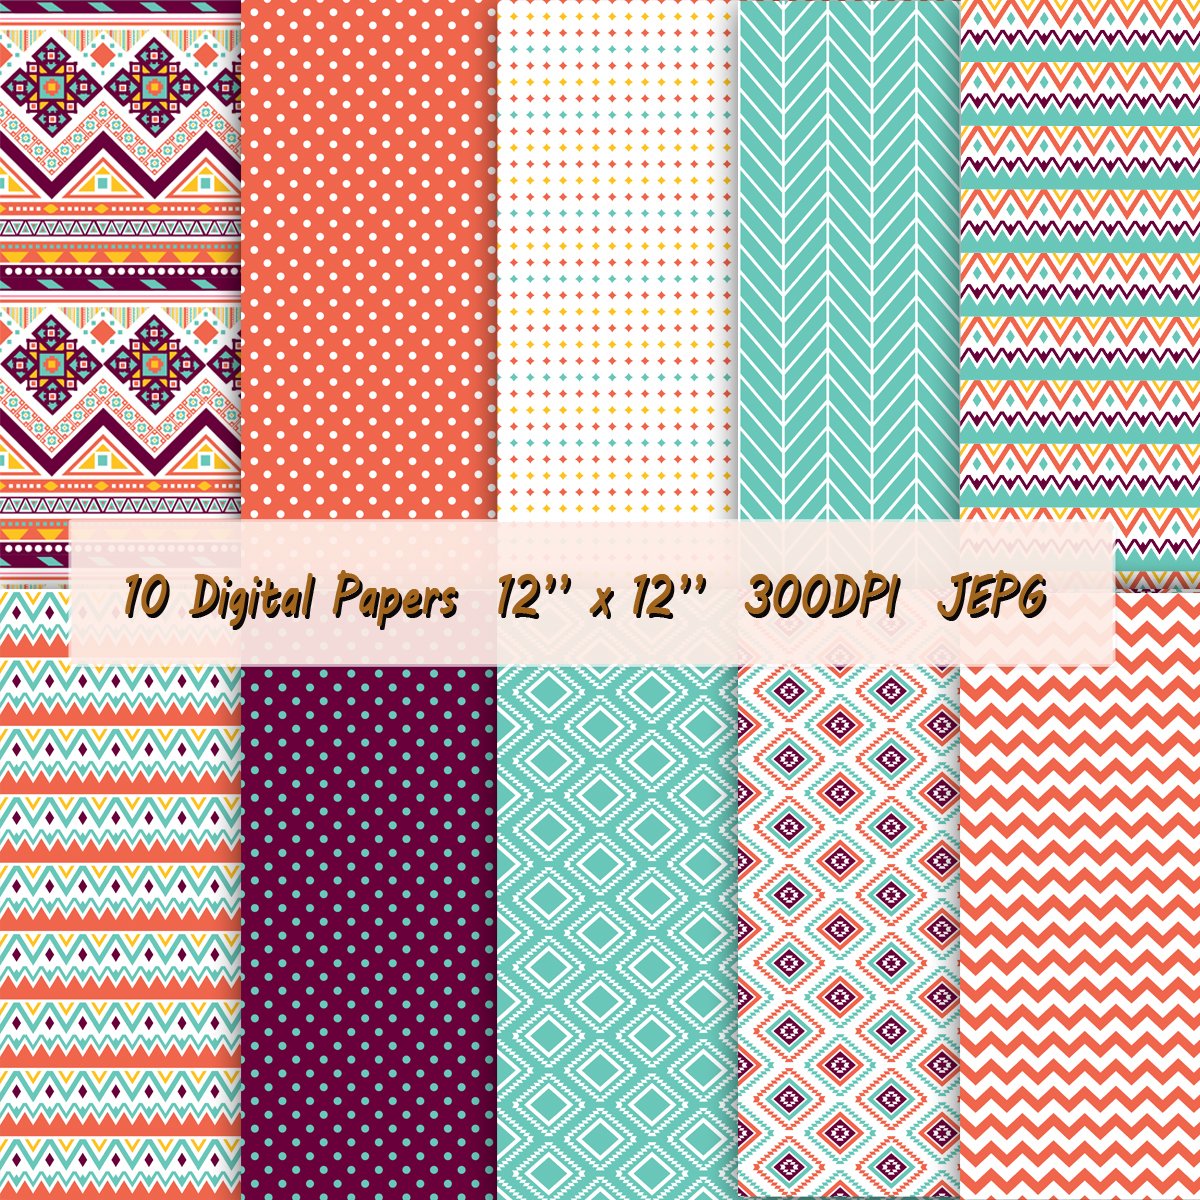 Digital Paper Including Aztec Patterns And Geometric Models In Vibrant Colors: Orange, Turquoise, Dark Brown And White